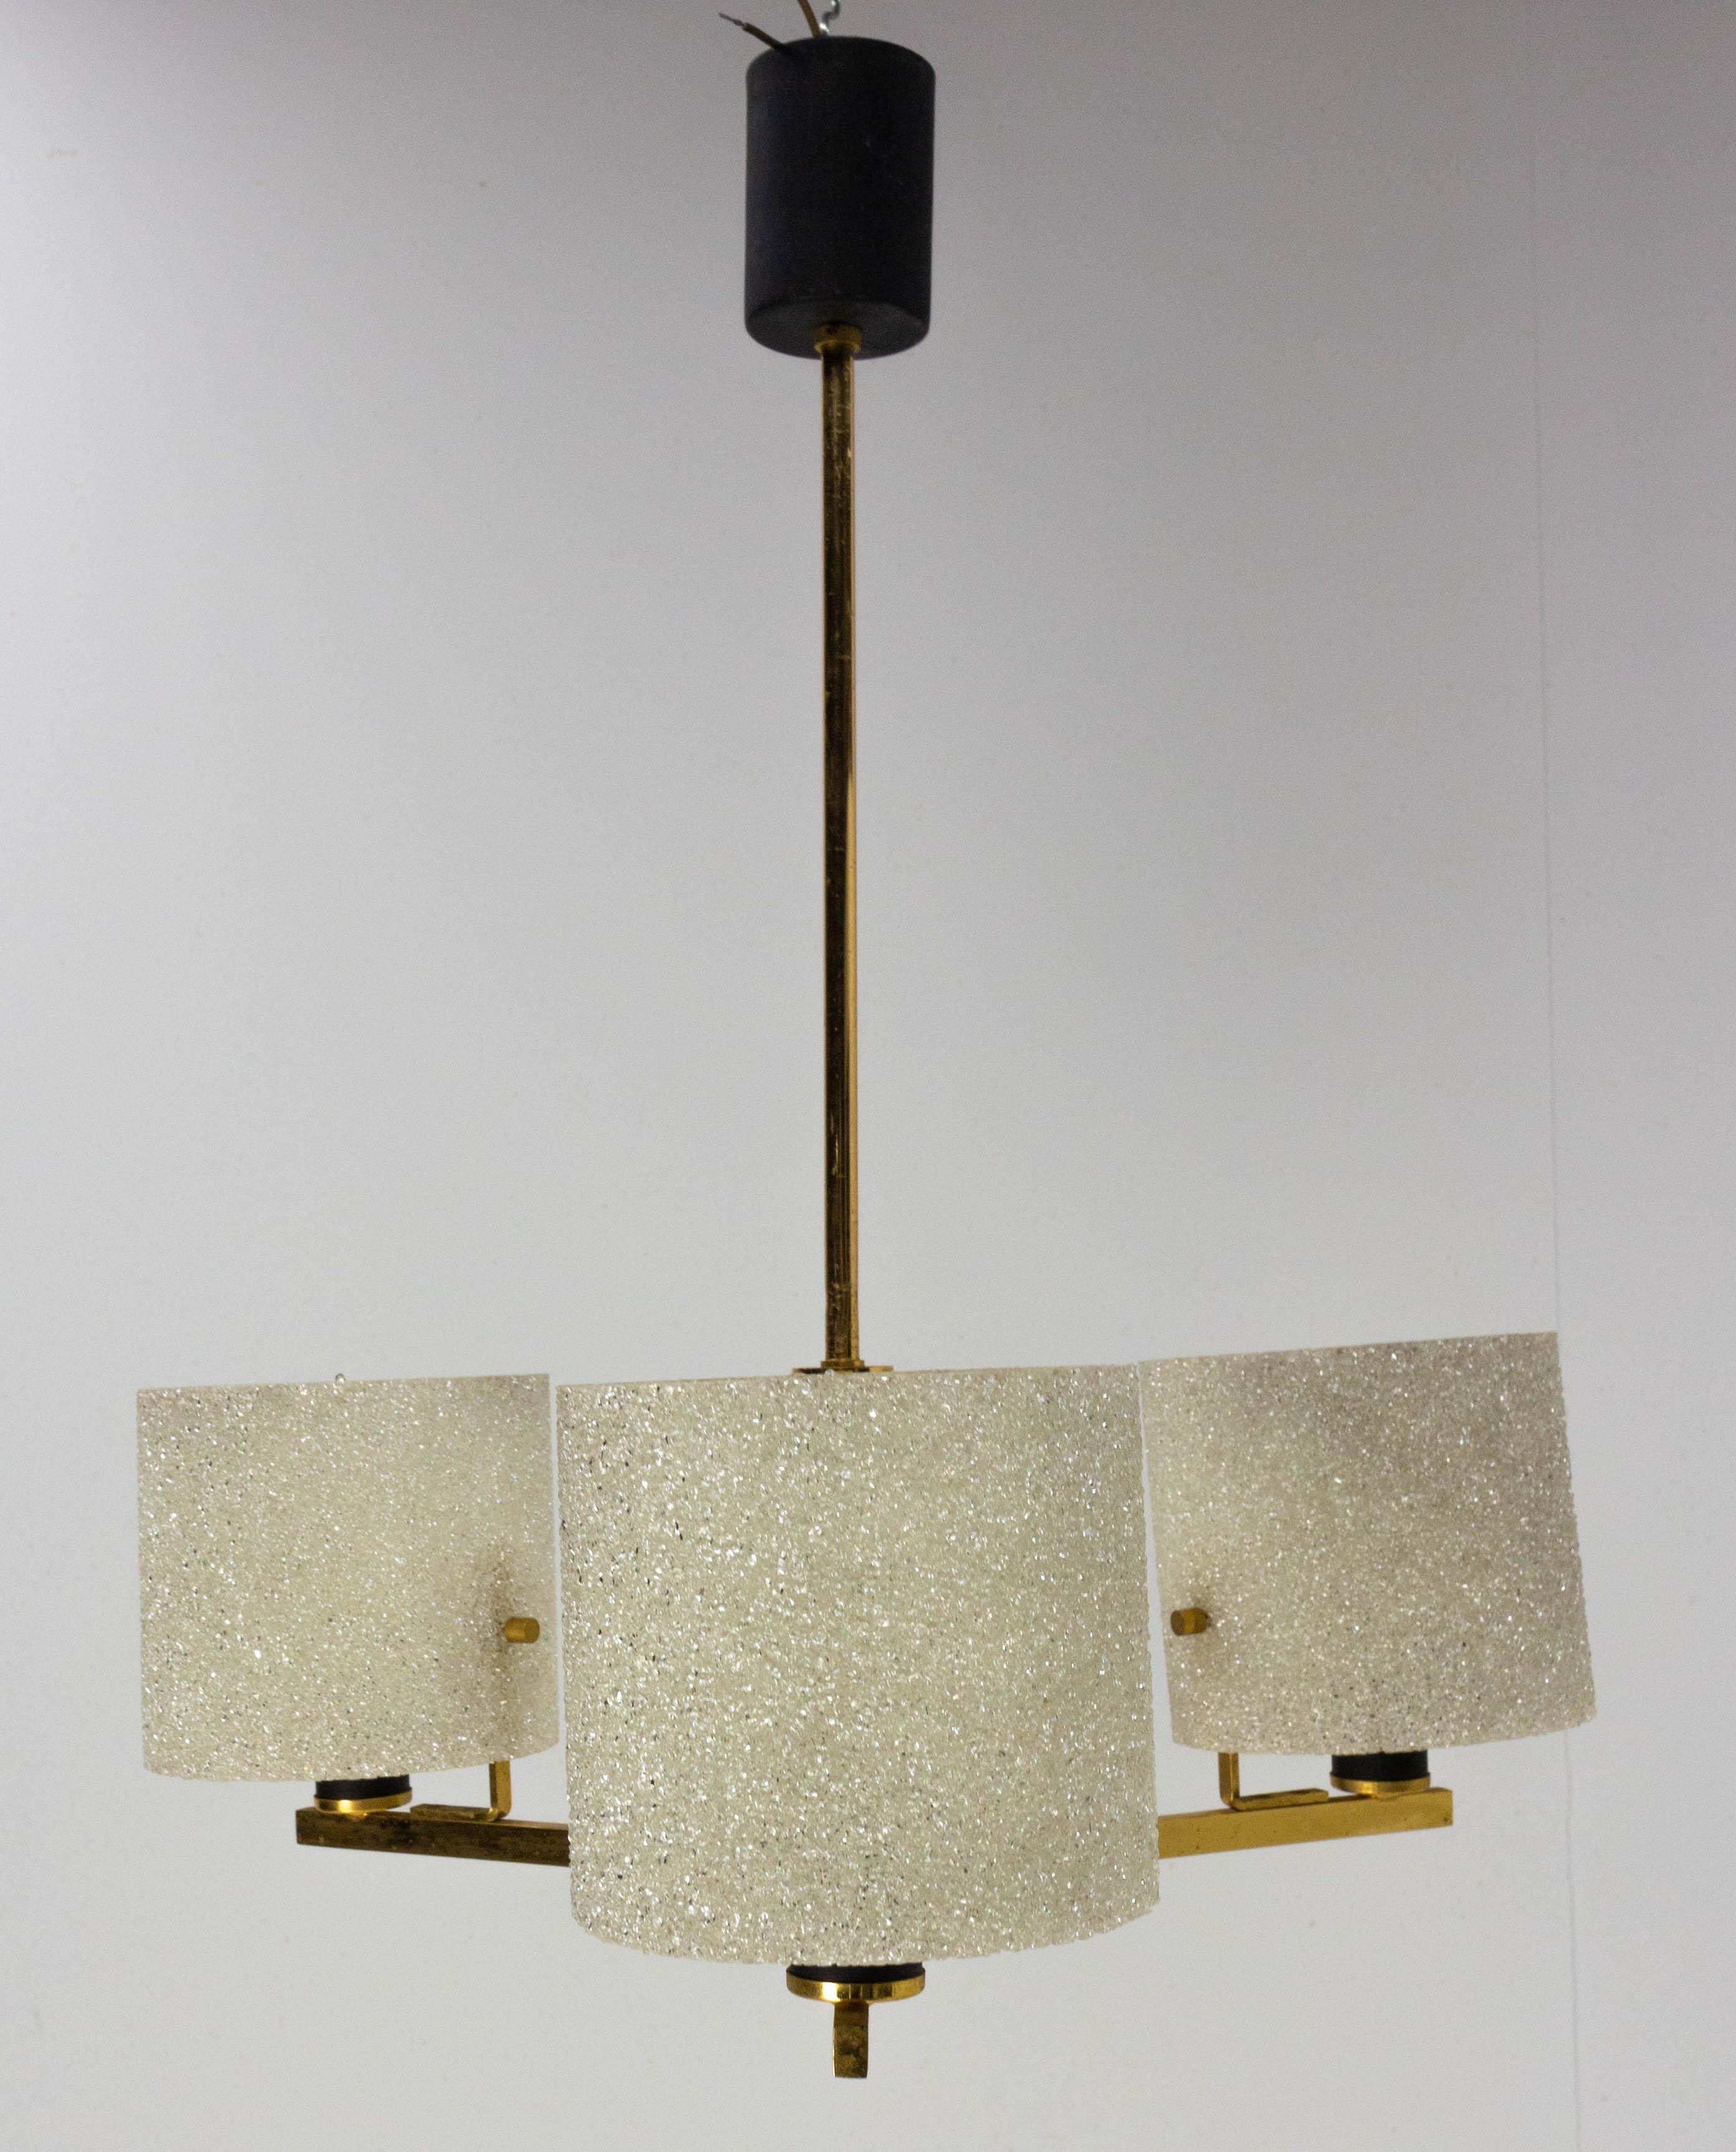 French Chandelier Ceiling Pendant Lustre Perspex and Brass Maison Arlus c. 1950 For Sale 1